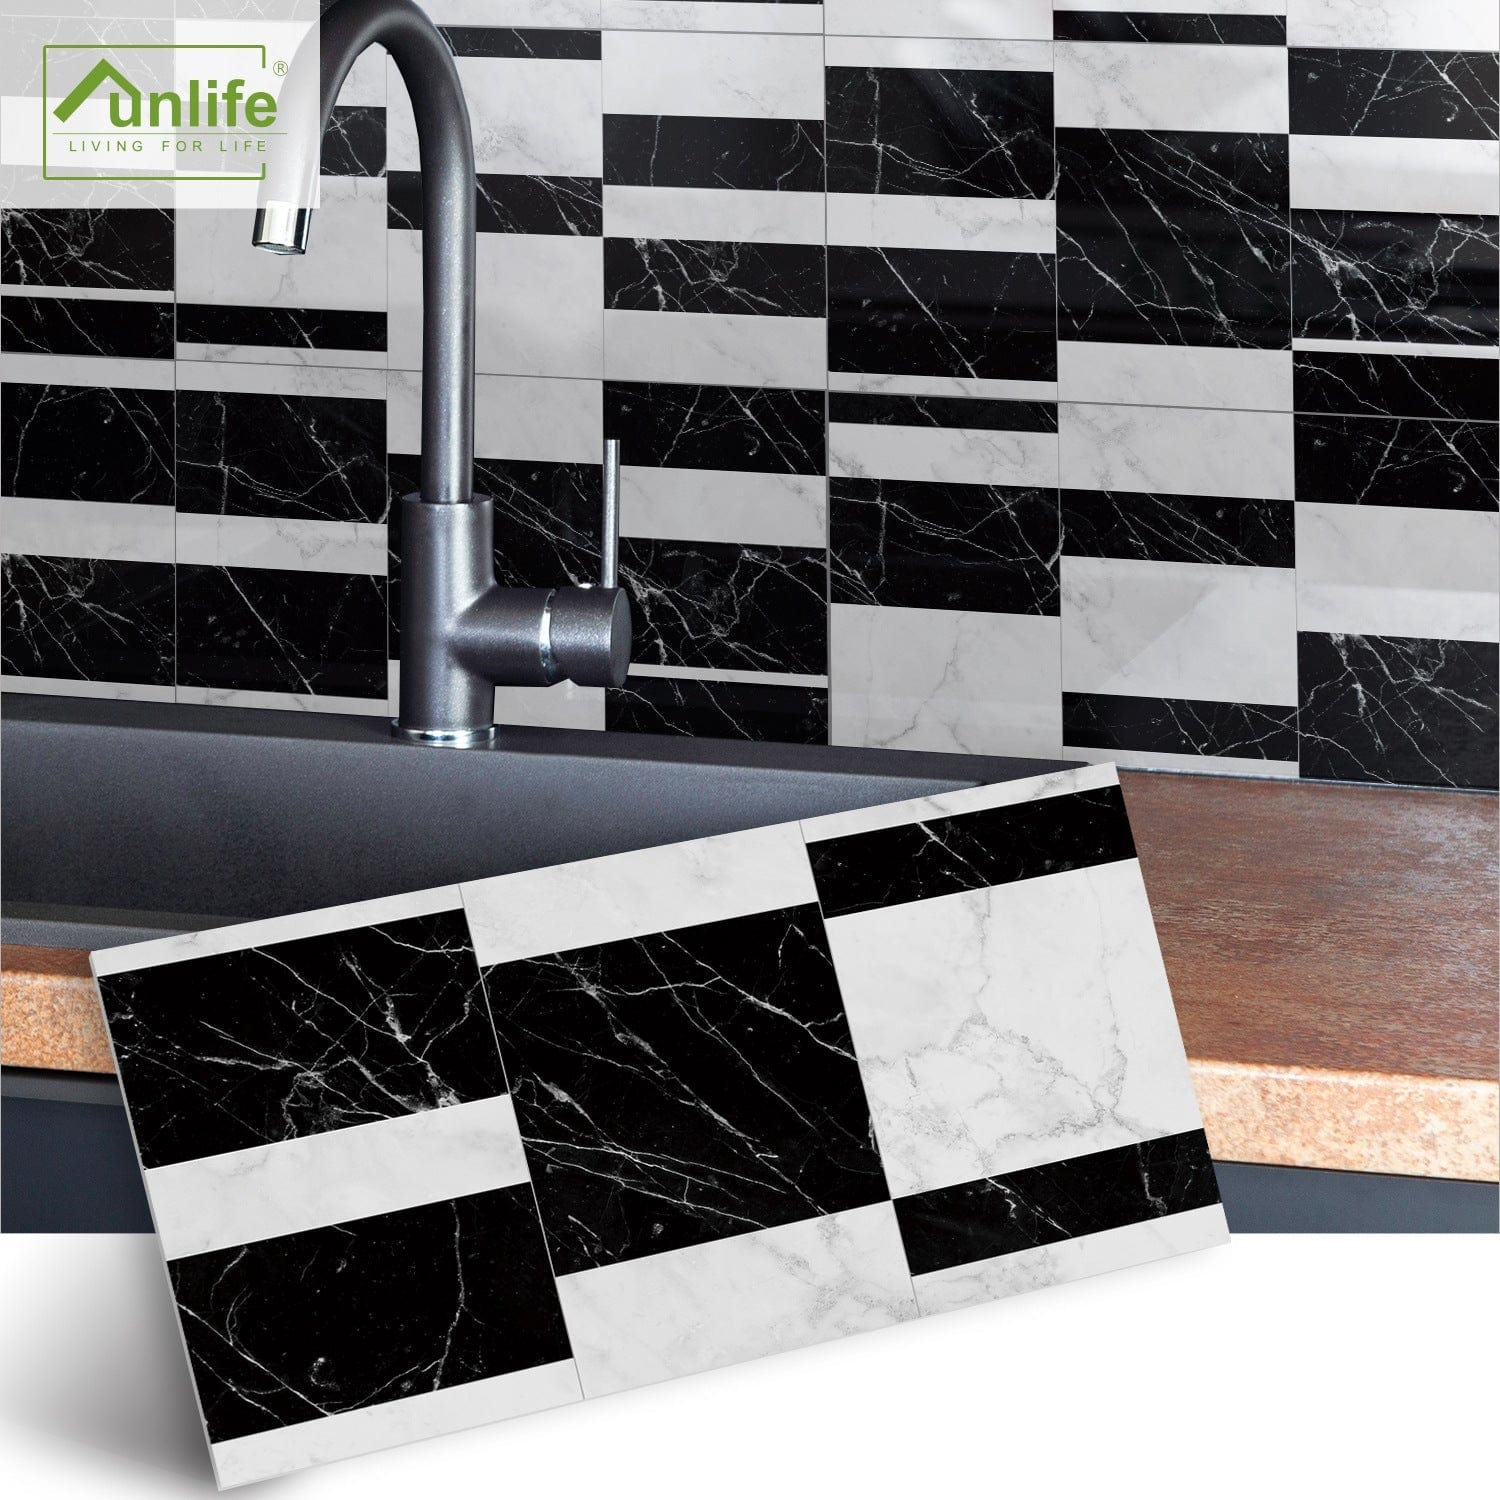 Funlife City Lights Thickened Brick Stickers Mosaic Marble Kitchen Background Wall Tile Stickers - CLASSY CLOSET BOUTIQUEFunlife City Lights Thickened Brick Stickers Mosaic Marble Kitchen Background Wall Tile Stickerseperlo9100ECC04E724777B172A35572FC86C130*15cmx4pcs